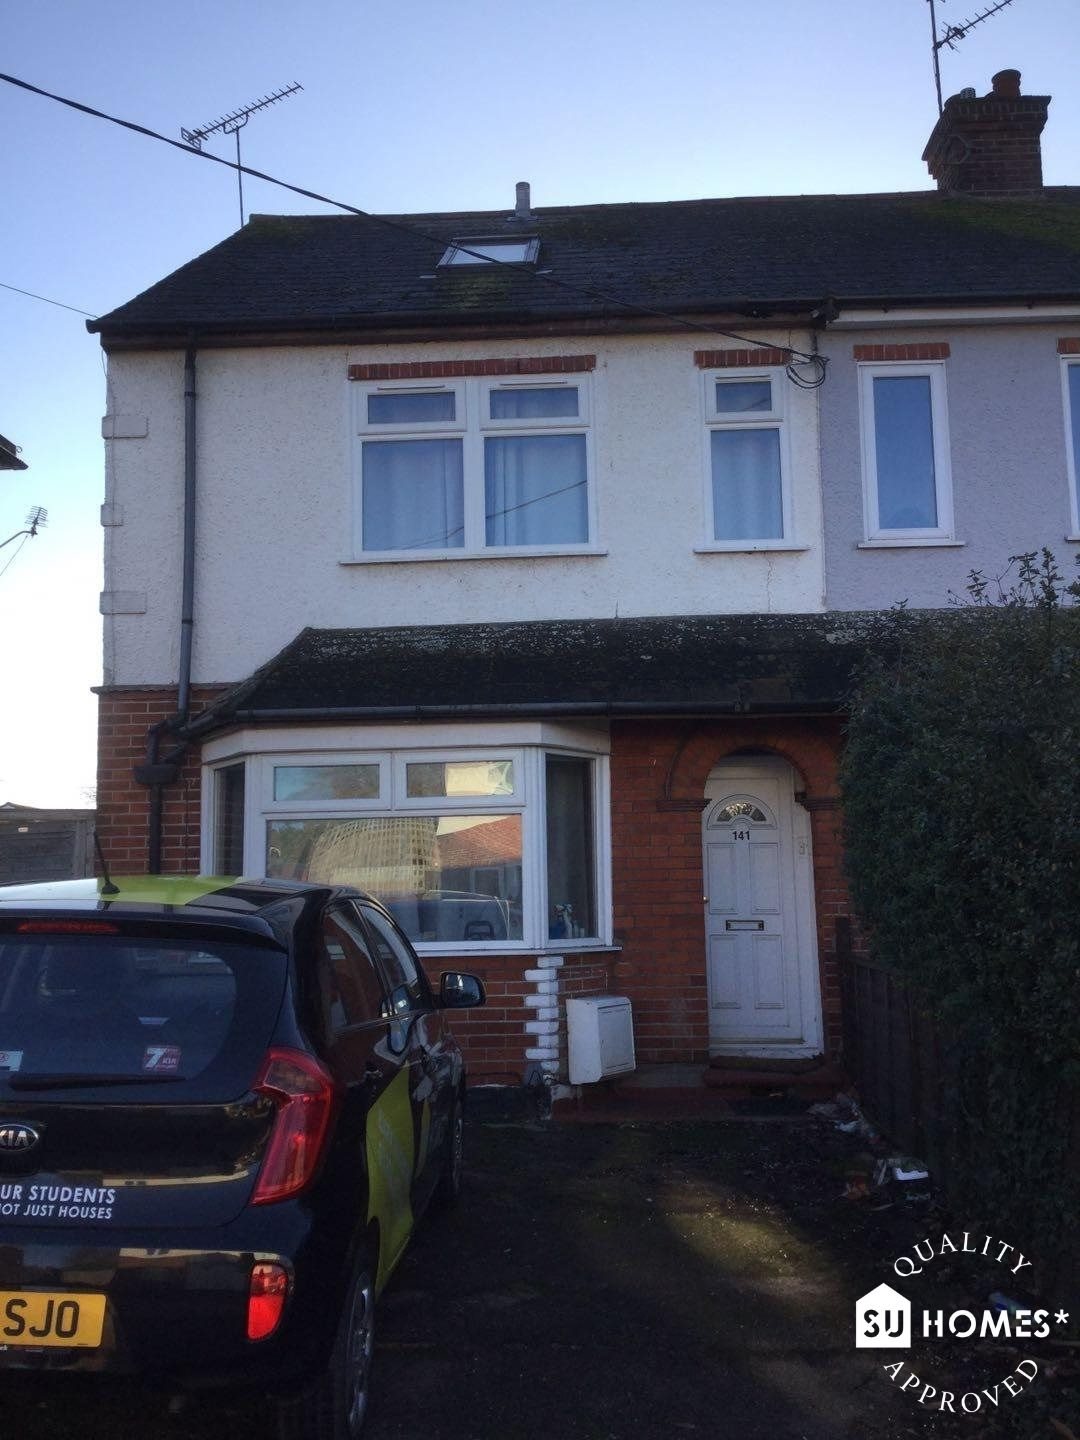 1 bed house / flat share to rent in Goring Road, Colchester, CO4 